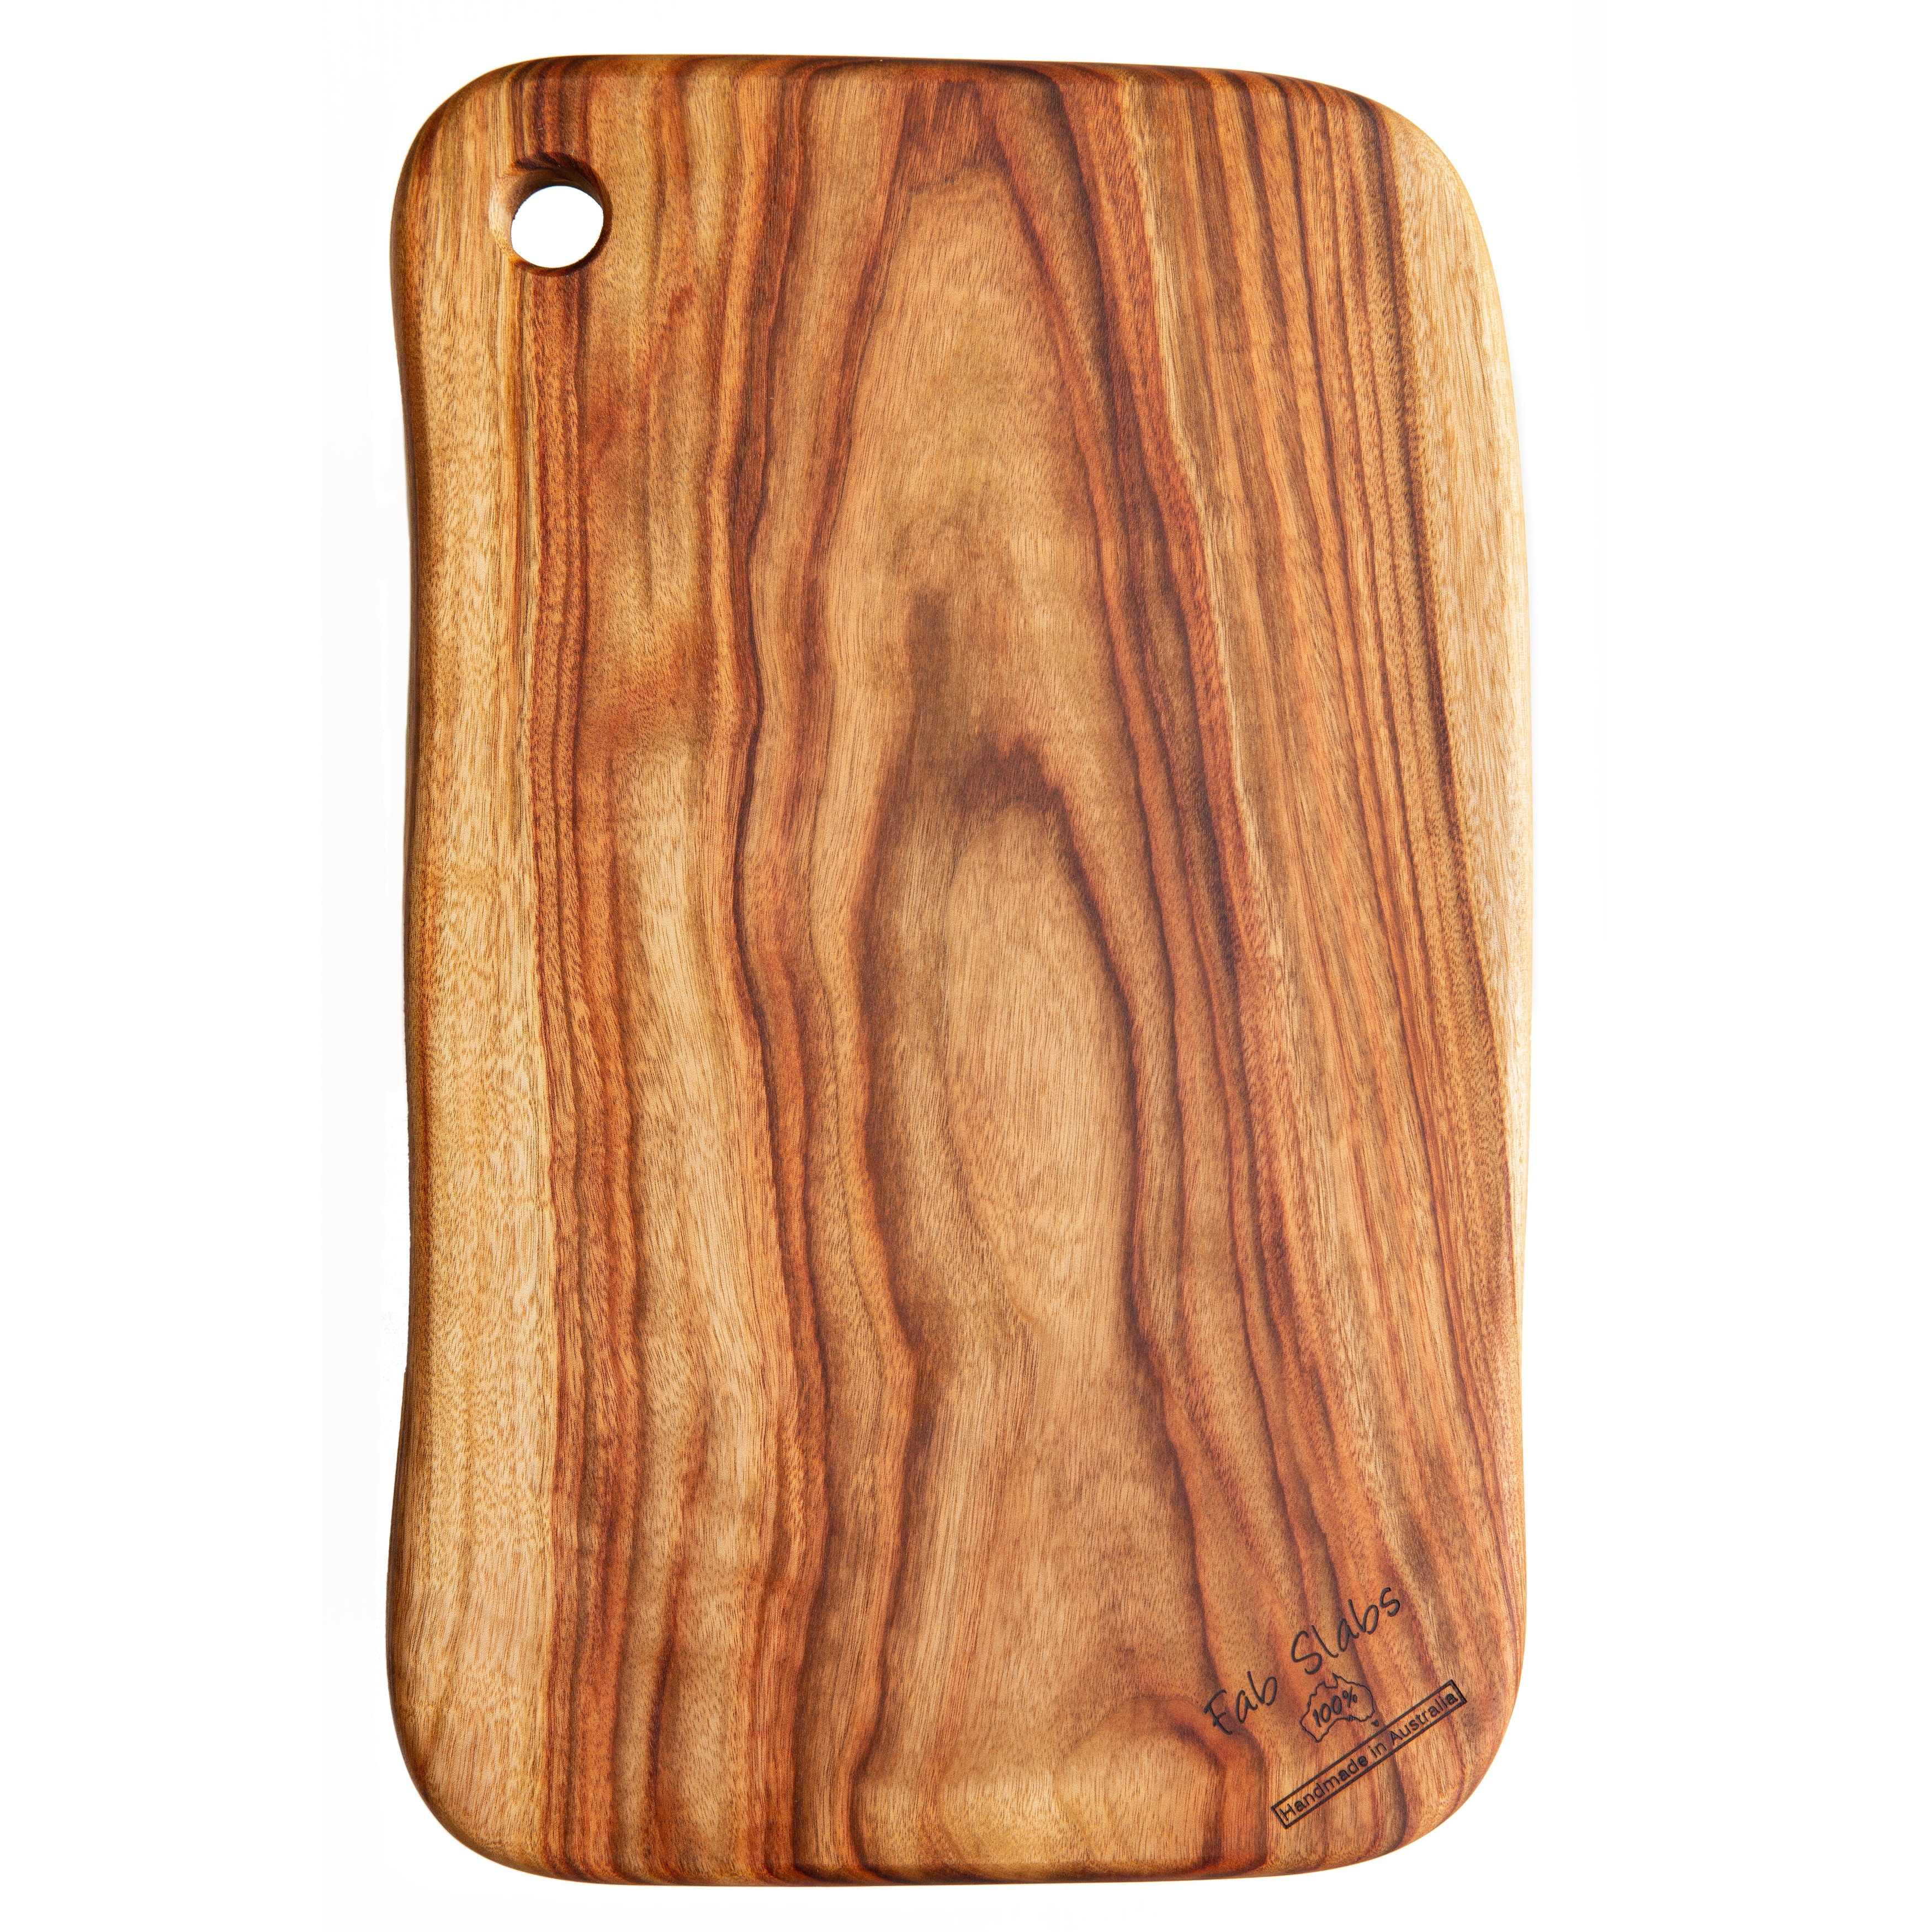 https://ak1.ostkcdn.com/images/products/is/images/direct/3d143adcbdc5bf05d7f795889cf9e70b3e98540a/FabSlabs-Natural-Wood-Camphor-Laurel-Large-Premium-Anti-Bacterial-Cutting-Board%2C-18.9%22-x-10.63%22.jpg